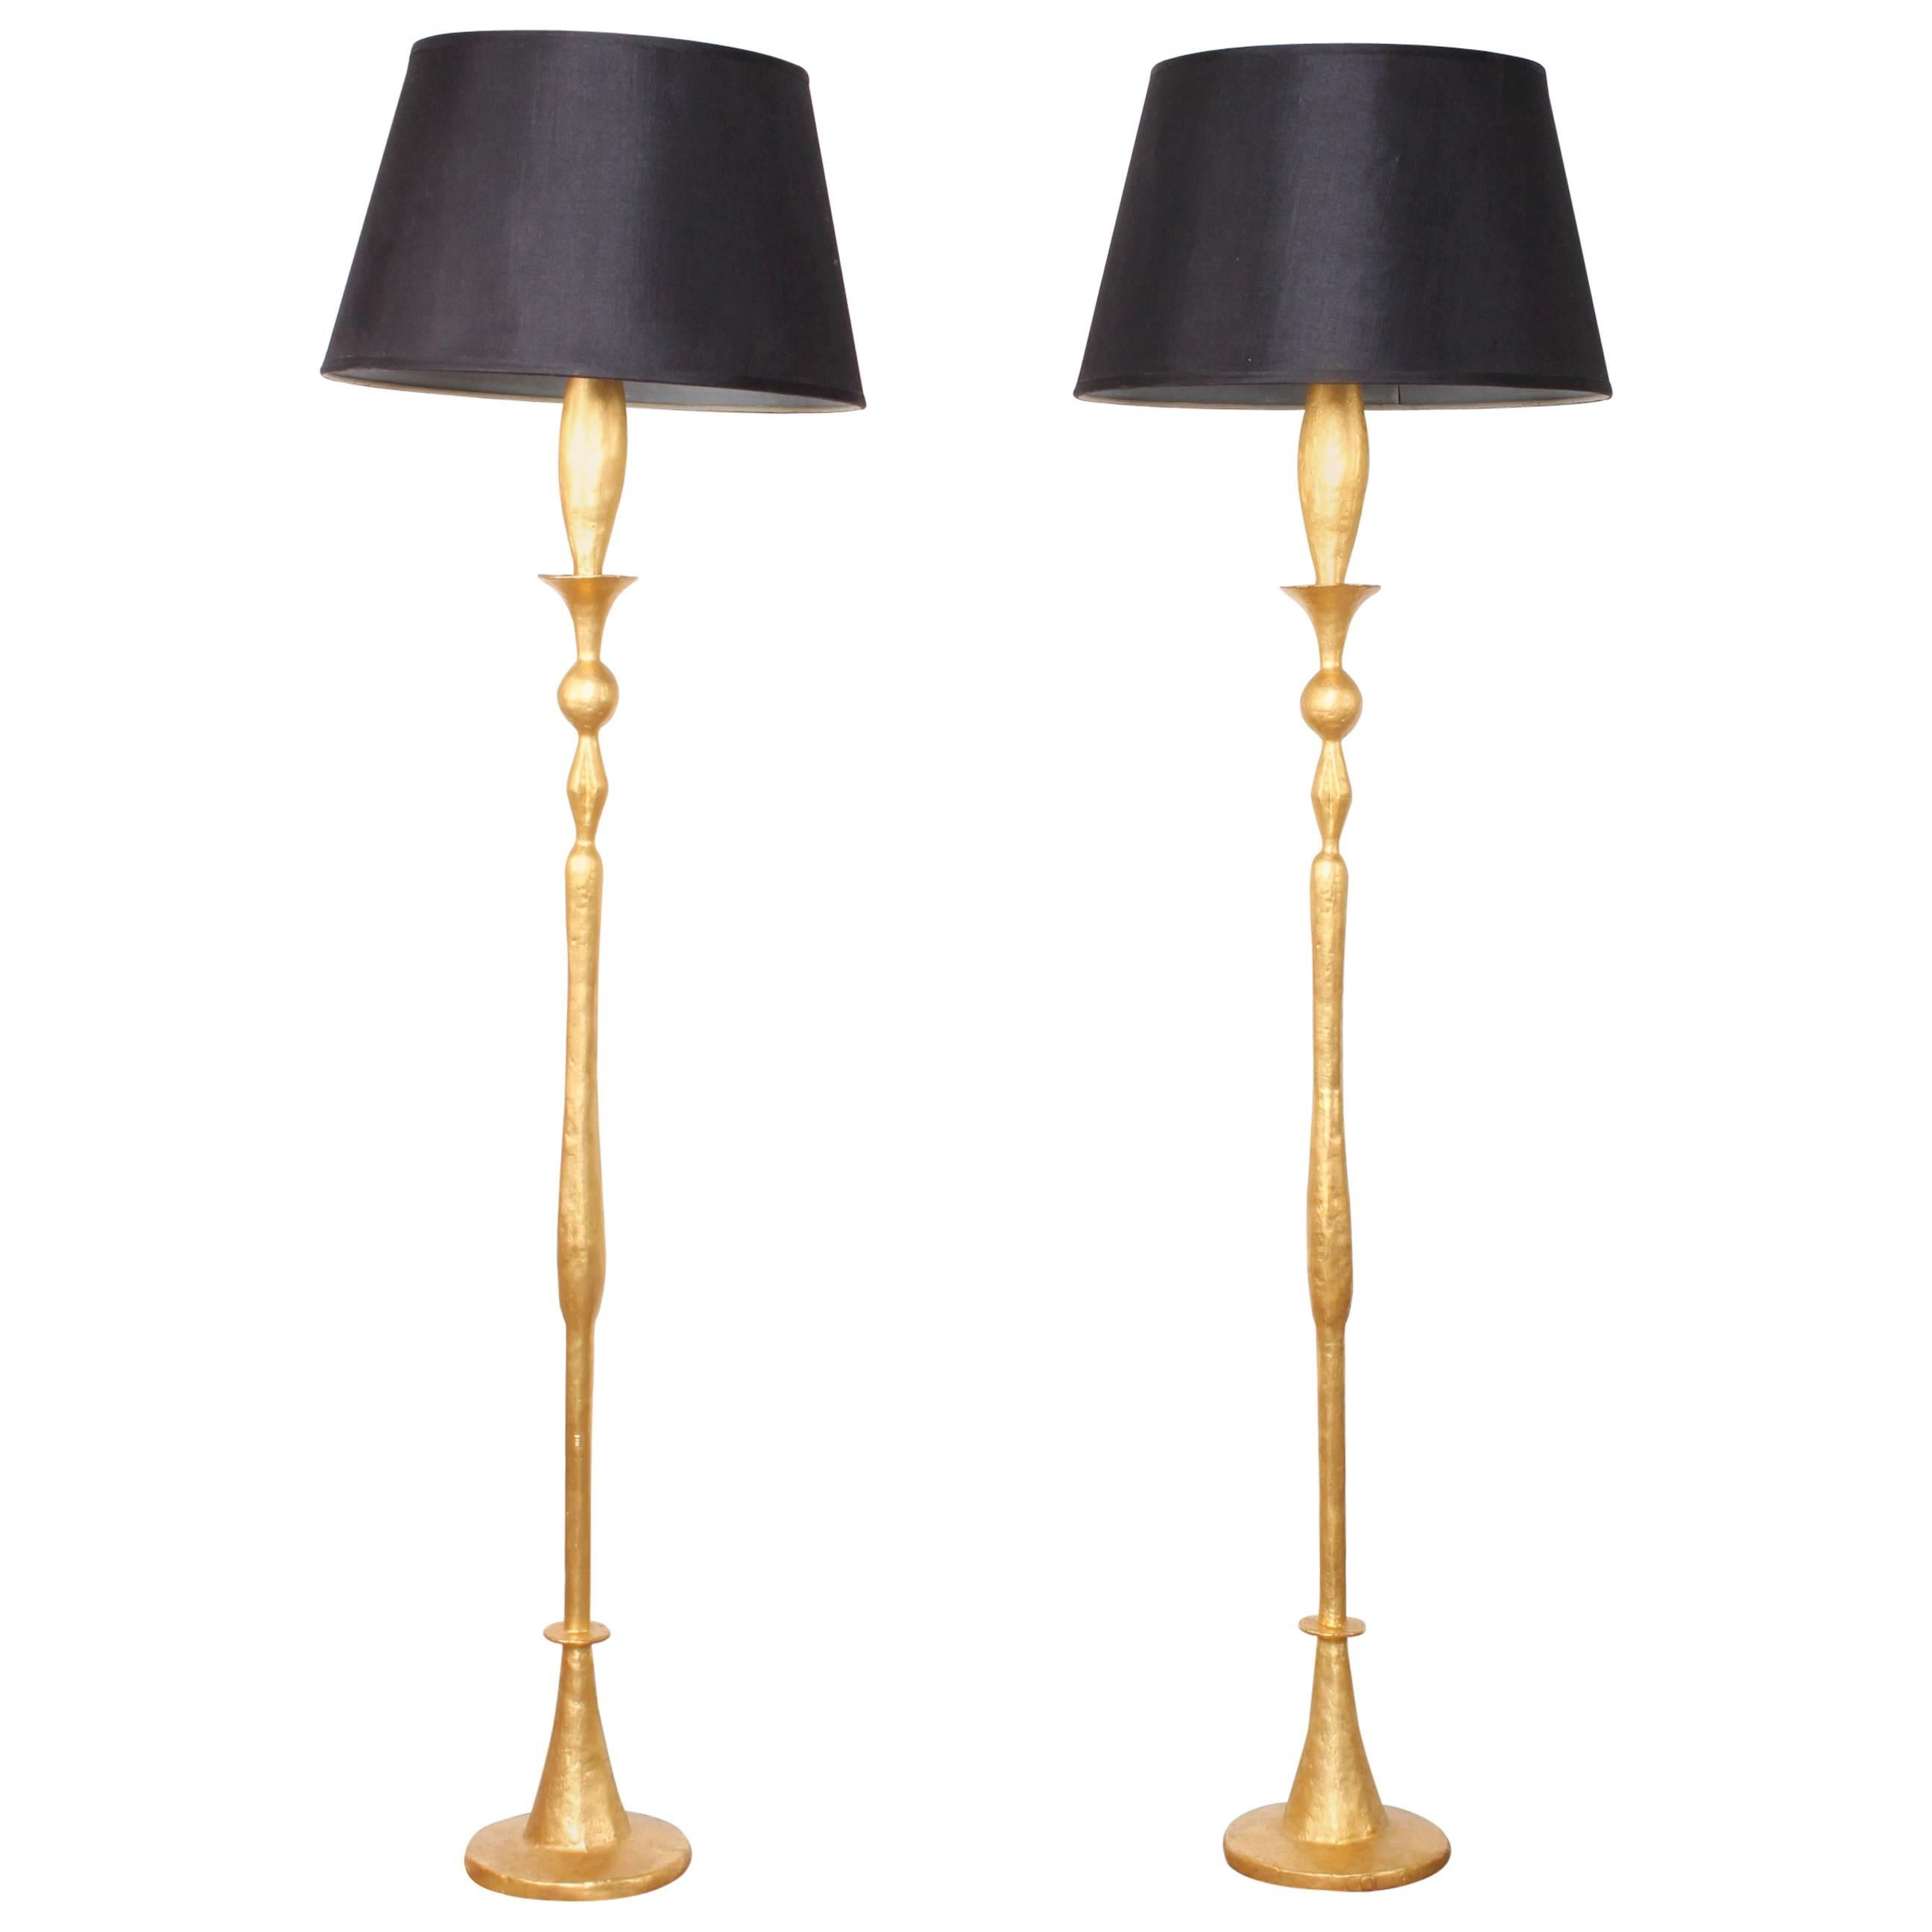 Pair of Gilded Bronze Floor Lamps by Alberto Giacometti